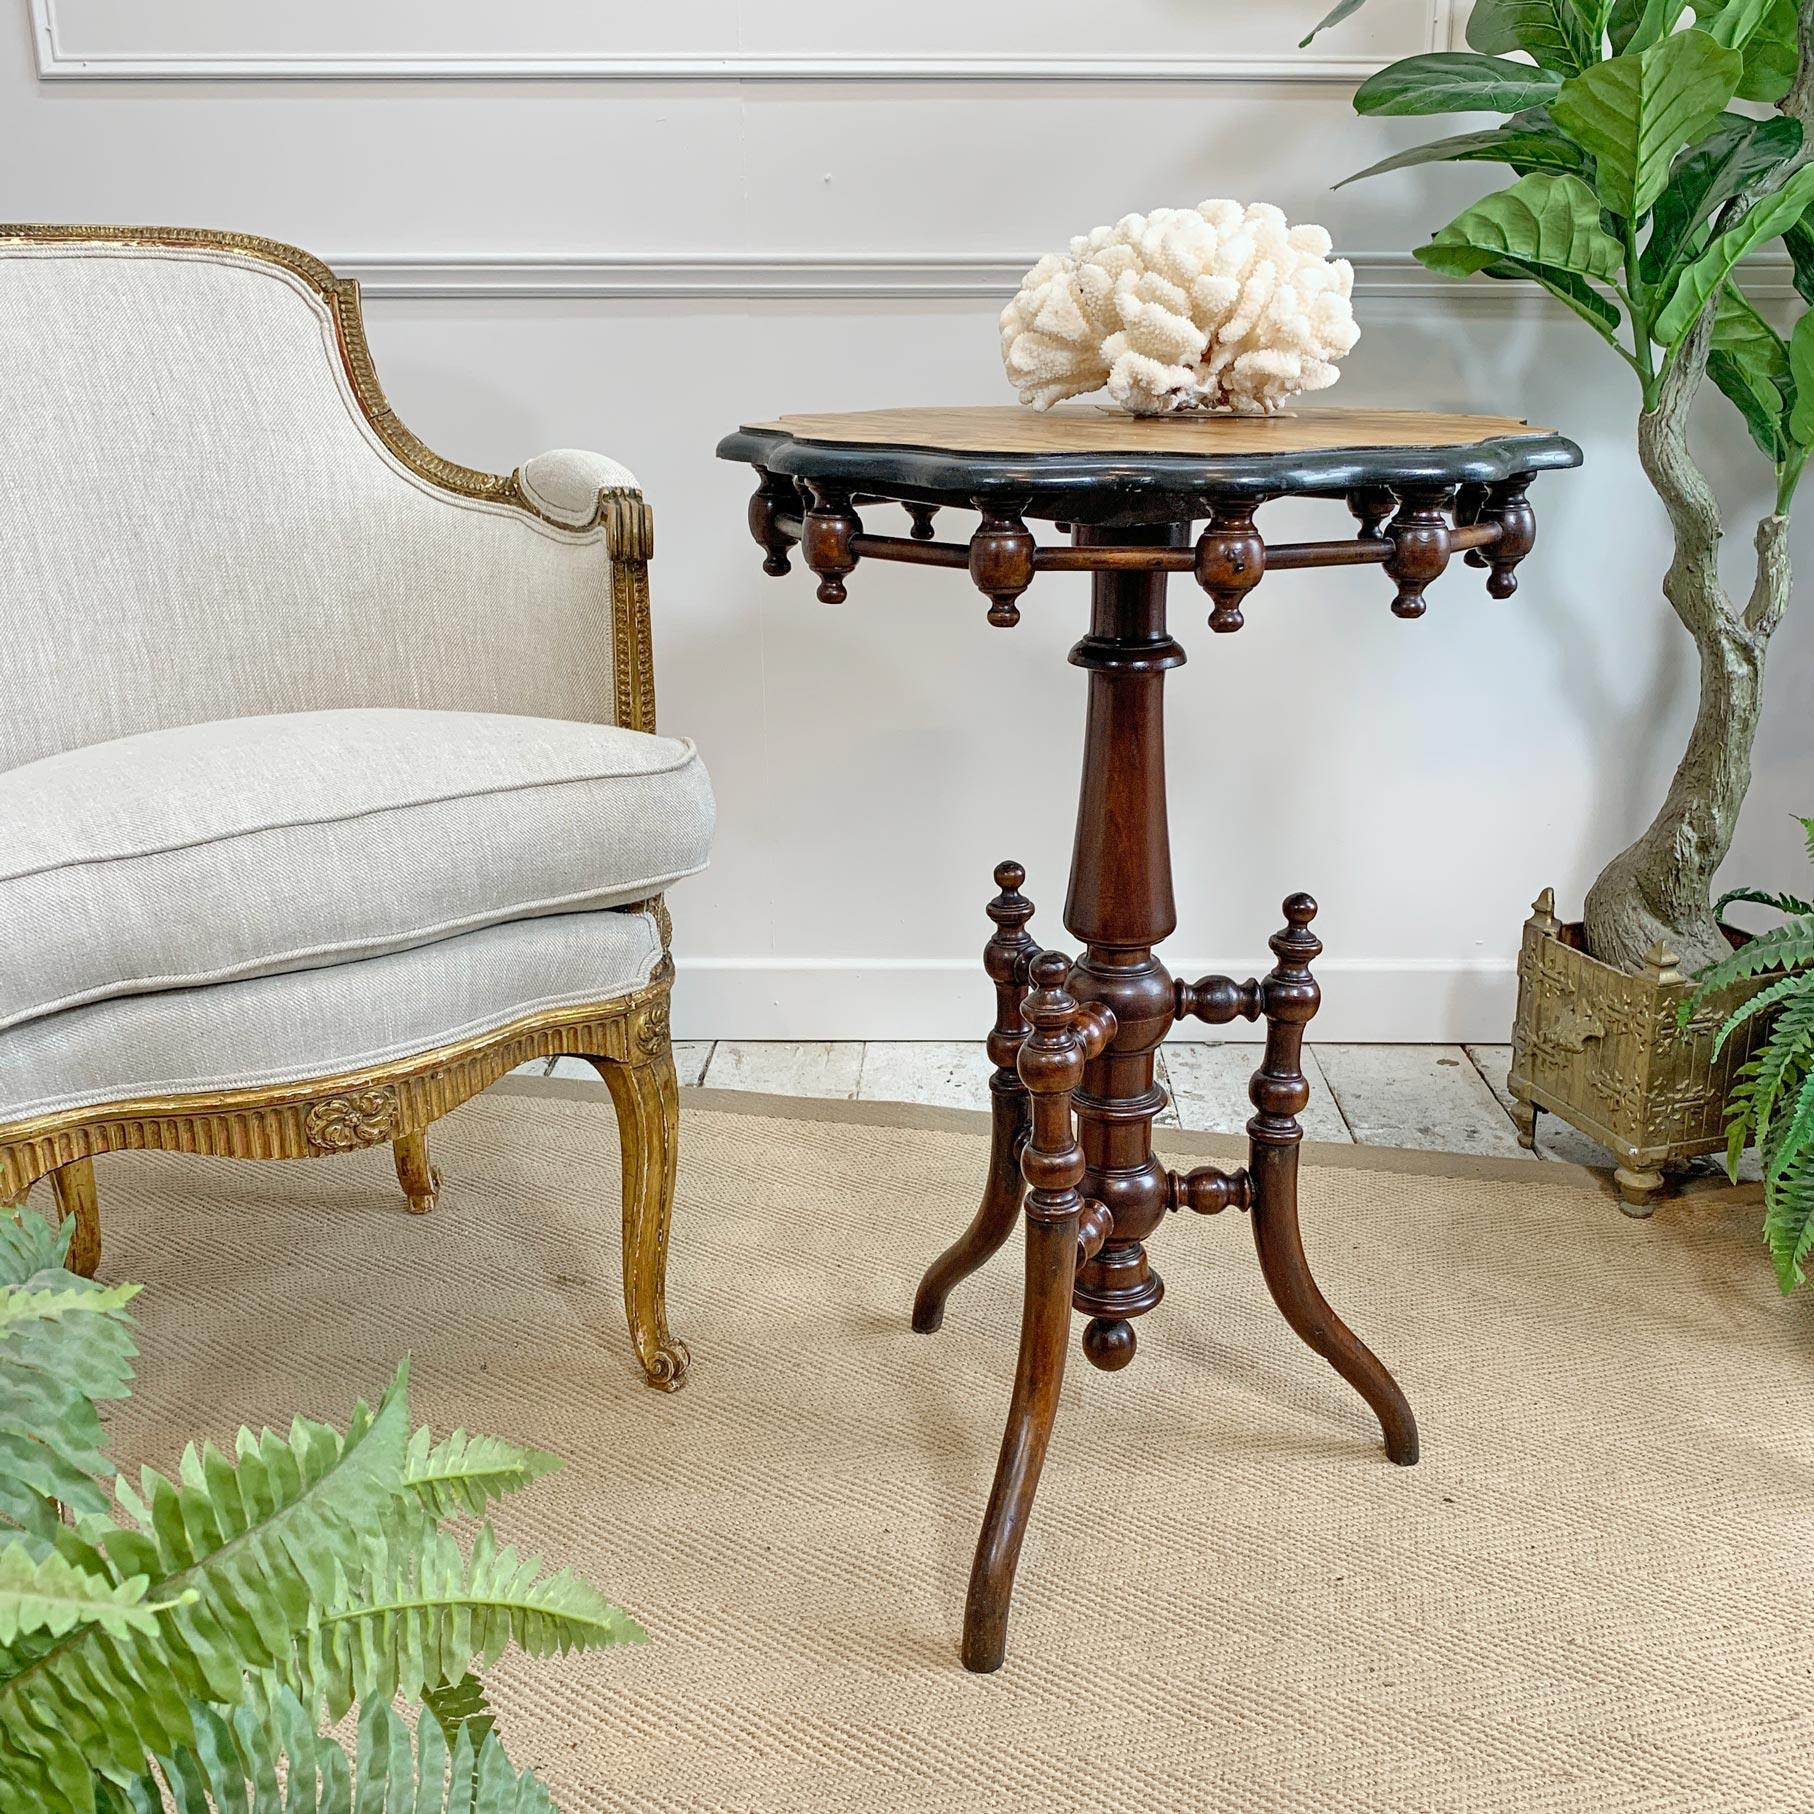 Antique Swedish 'Gypsy' style table
Neo renaissance style dating from the mid-1800s
Scalloped ebonised edge with turned bobbin detail
Probably walnut with a burr walnut veneer top
Central turned pedestal supported on a trio of turned, bentwood